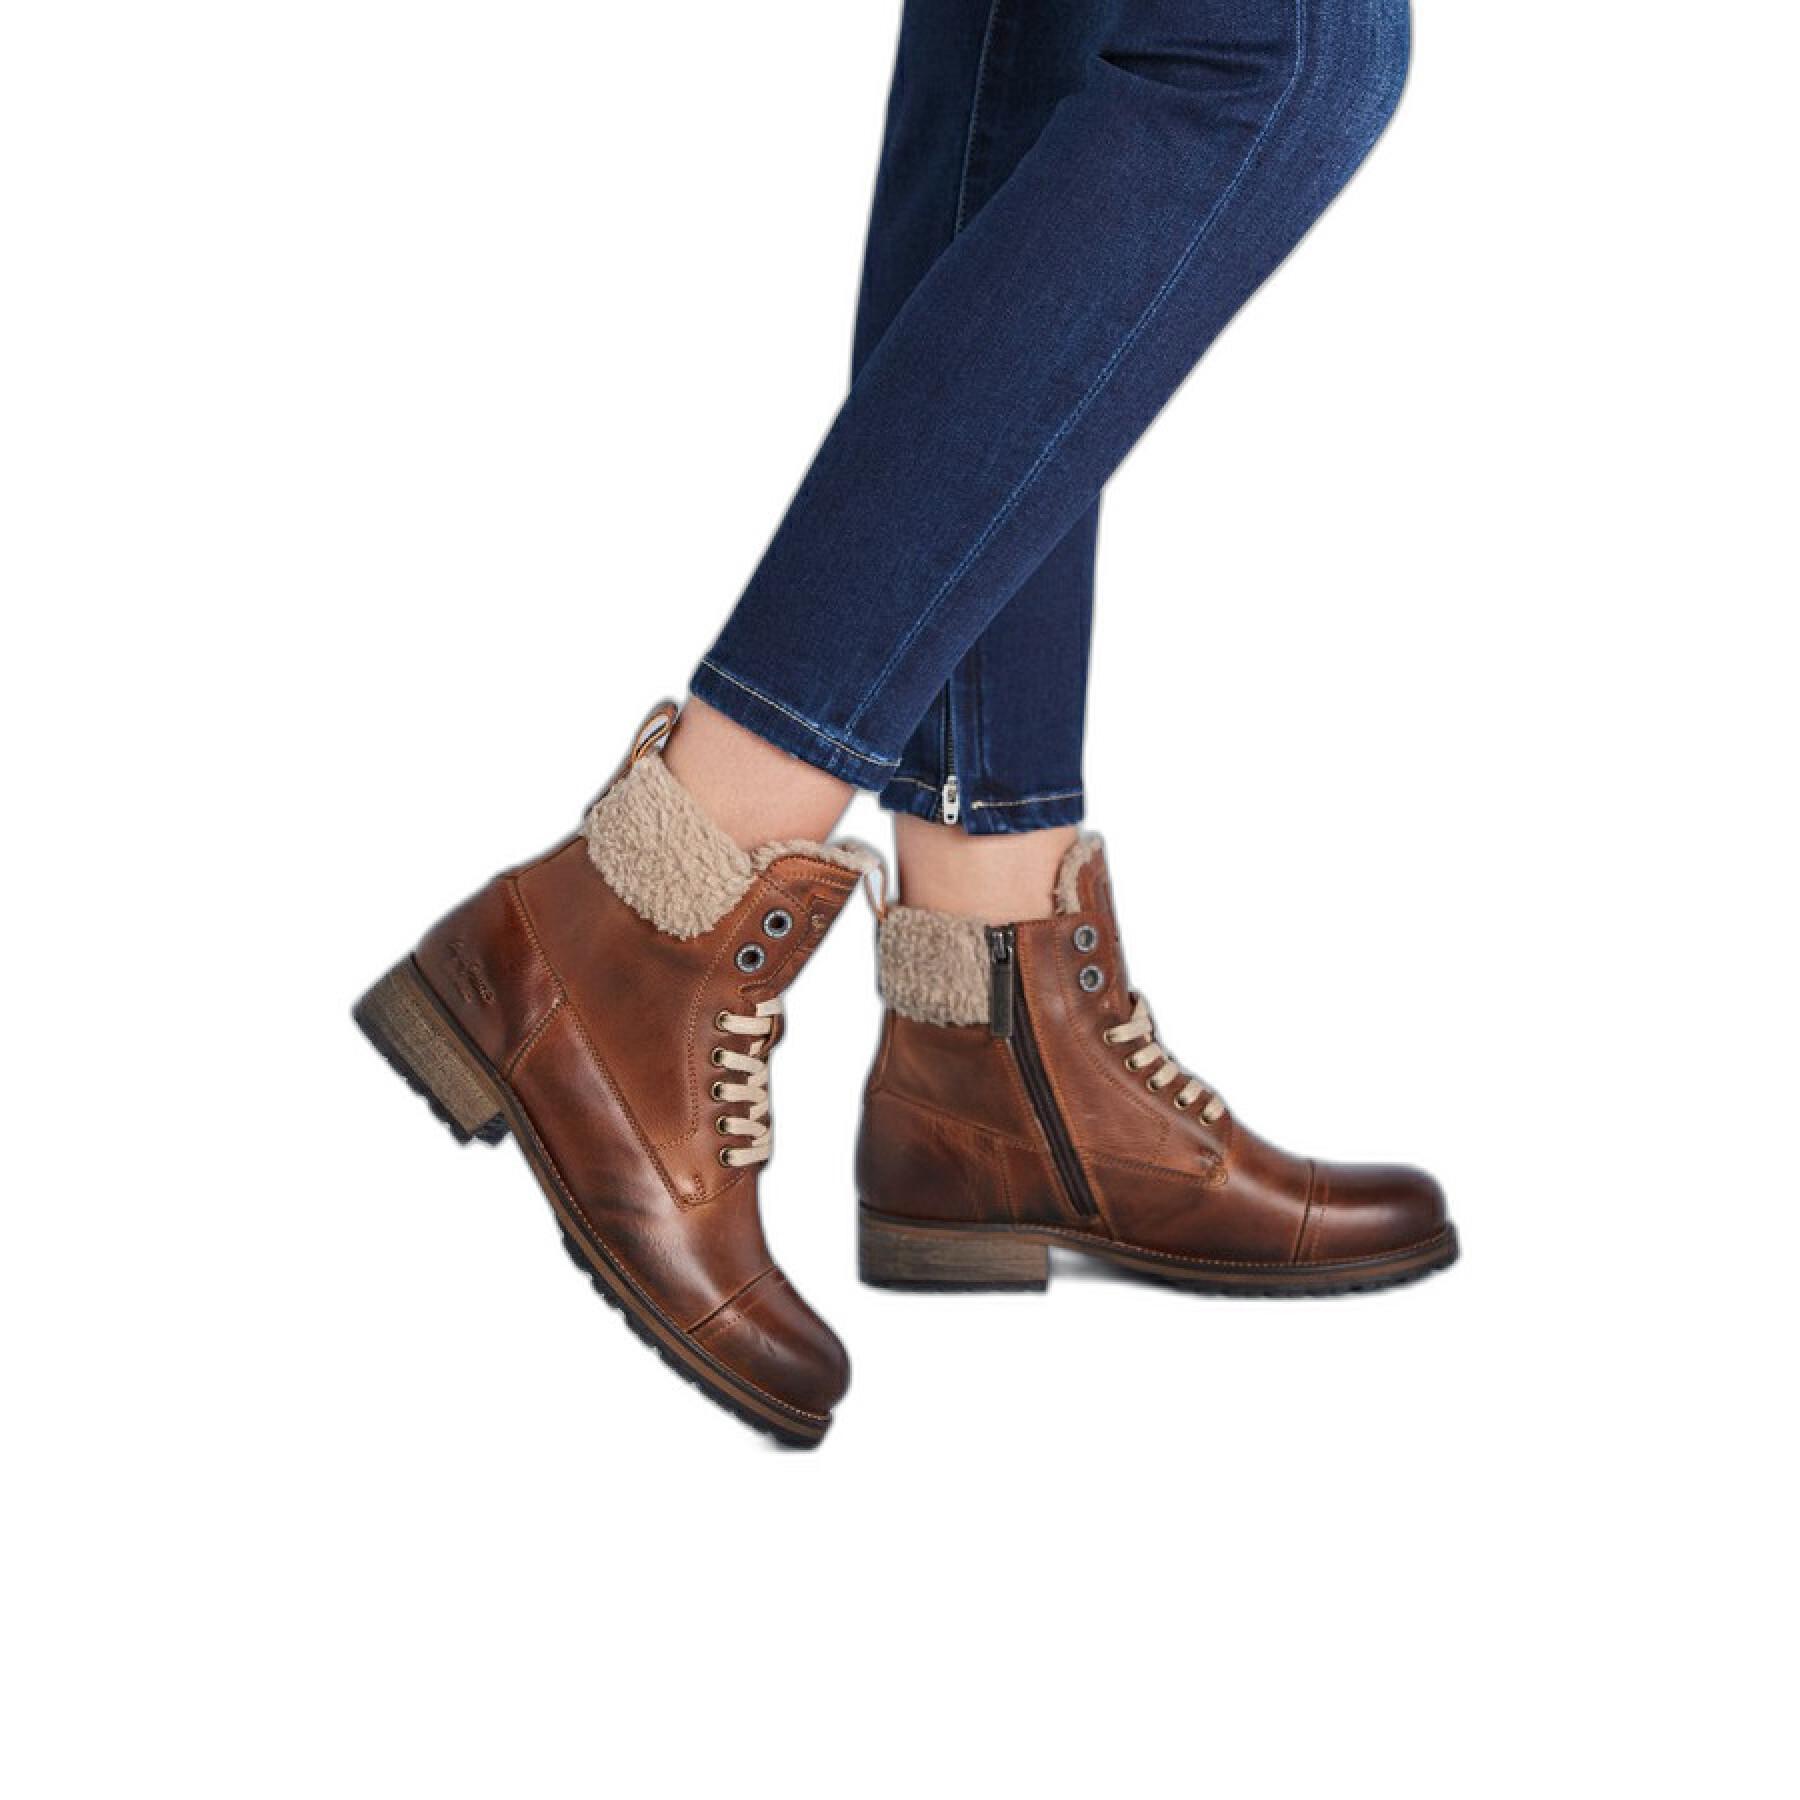 Women's boots Pepe Jeans Melting Warm